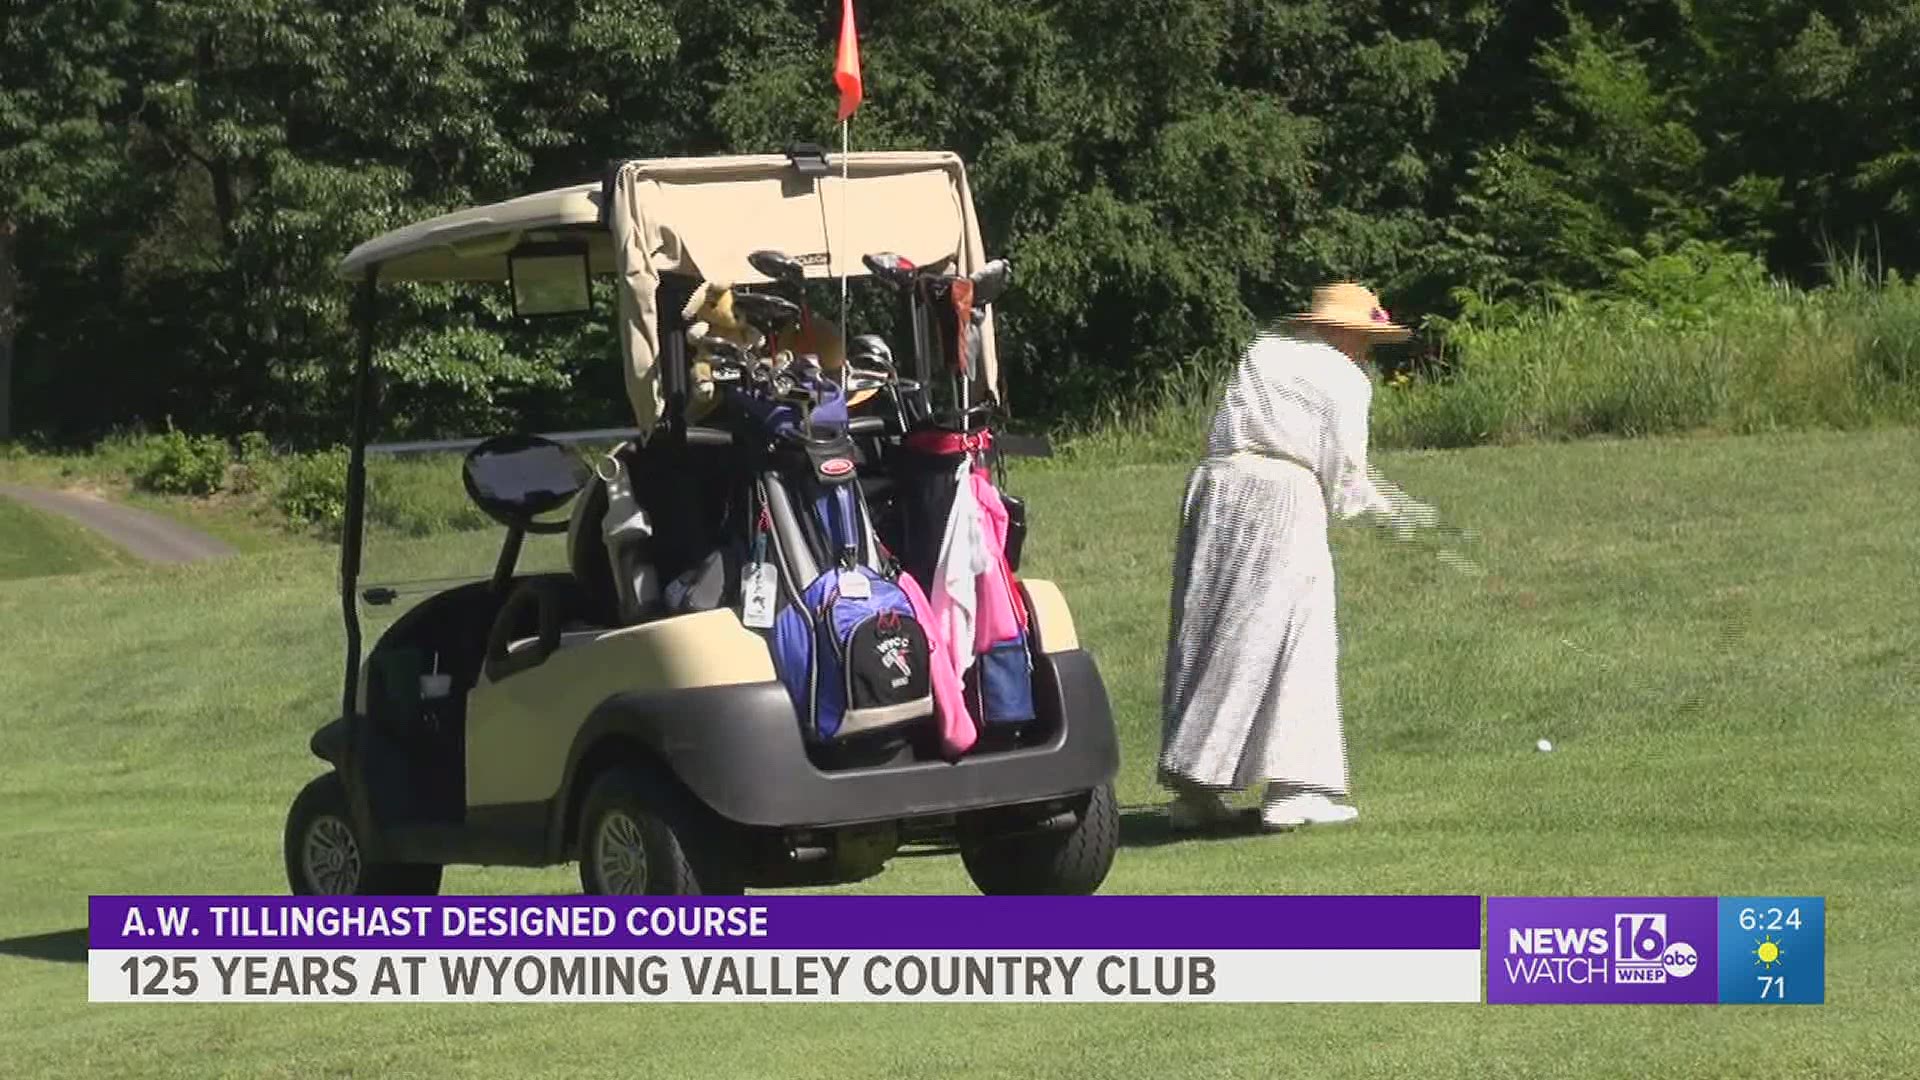 Wyoming Valley Country Club is celebrating 125 years in business.